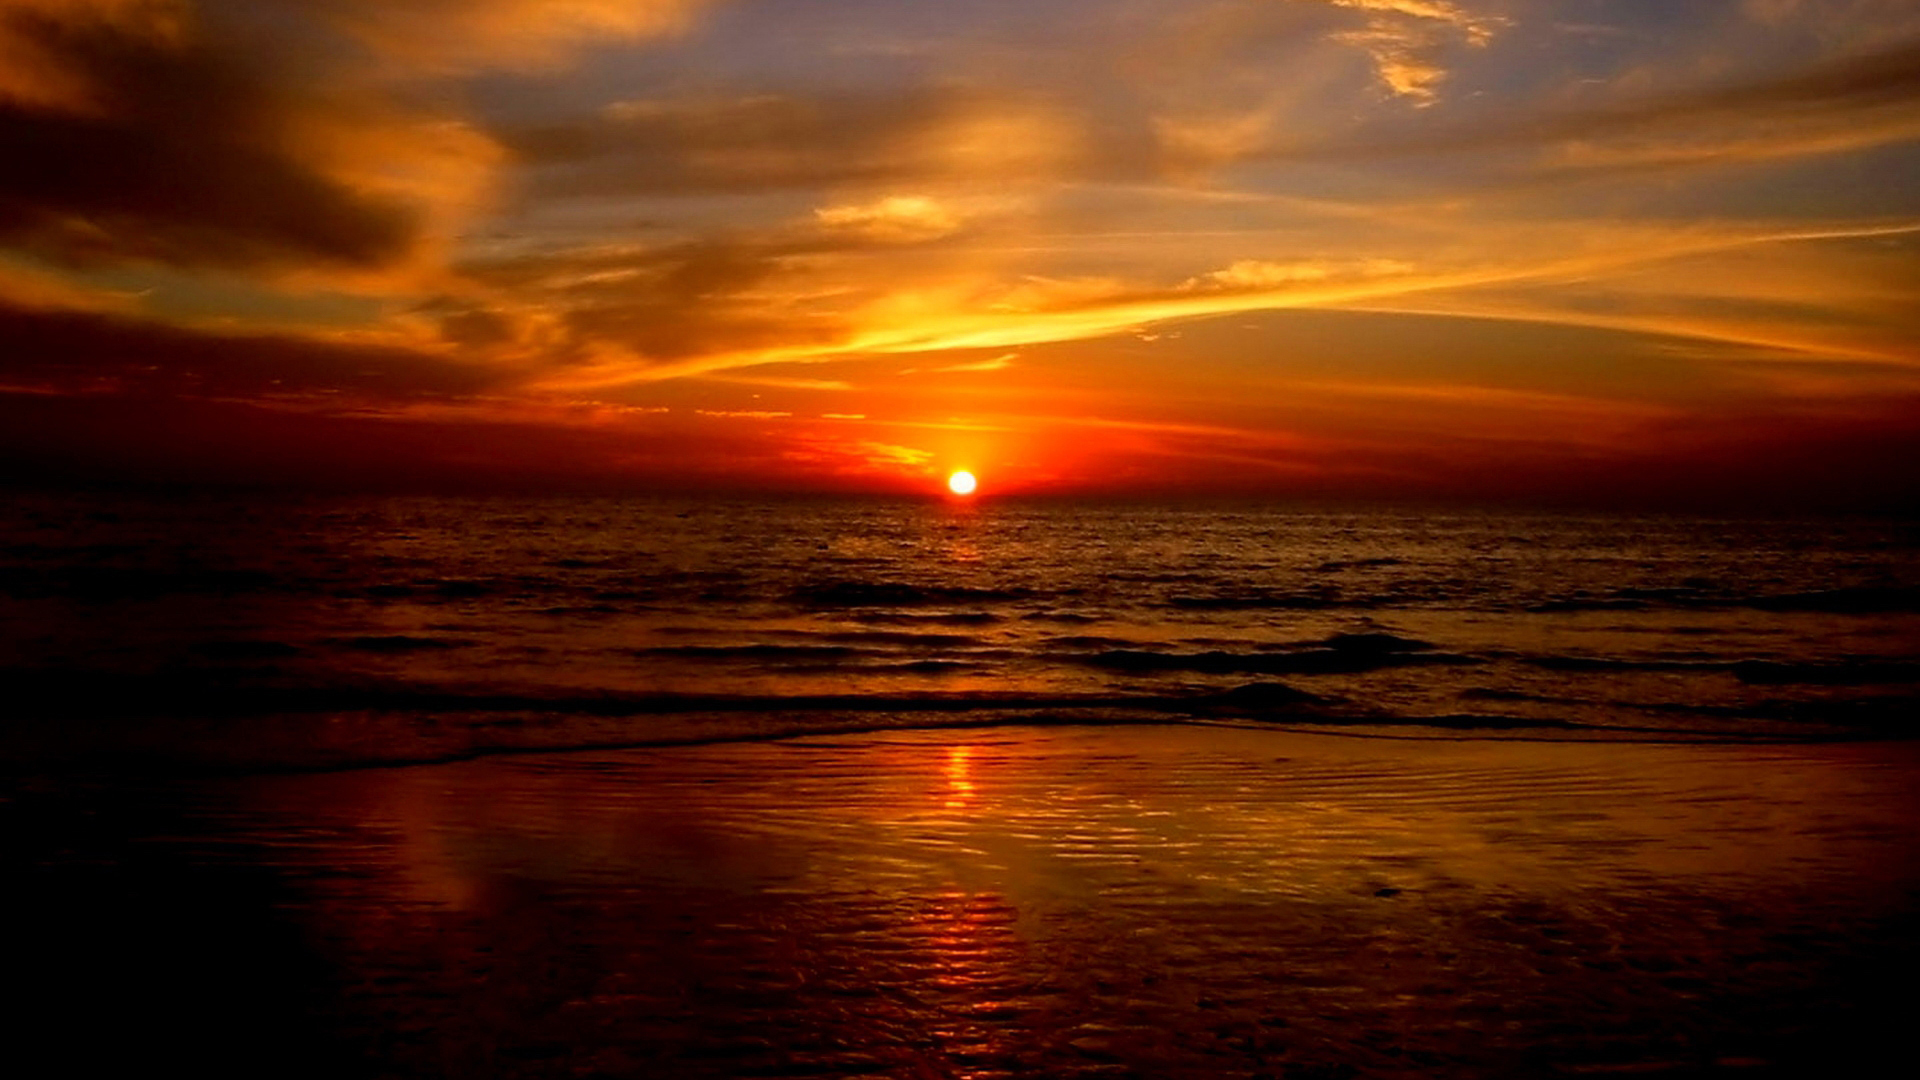 Beach Backgrounds In High Quality Ocean Sunset Pictures by Bryan